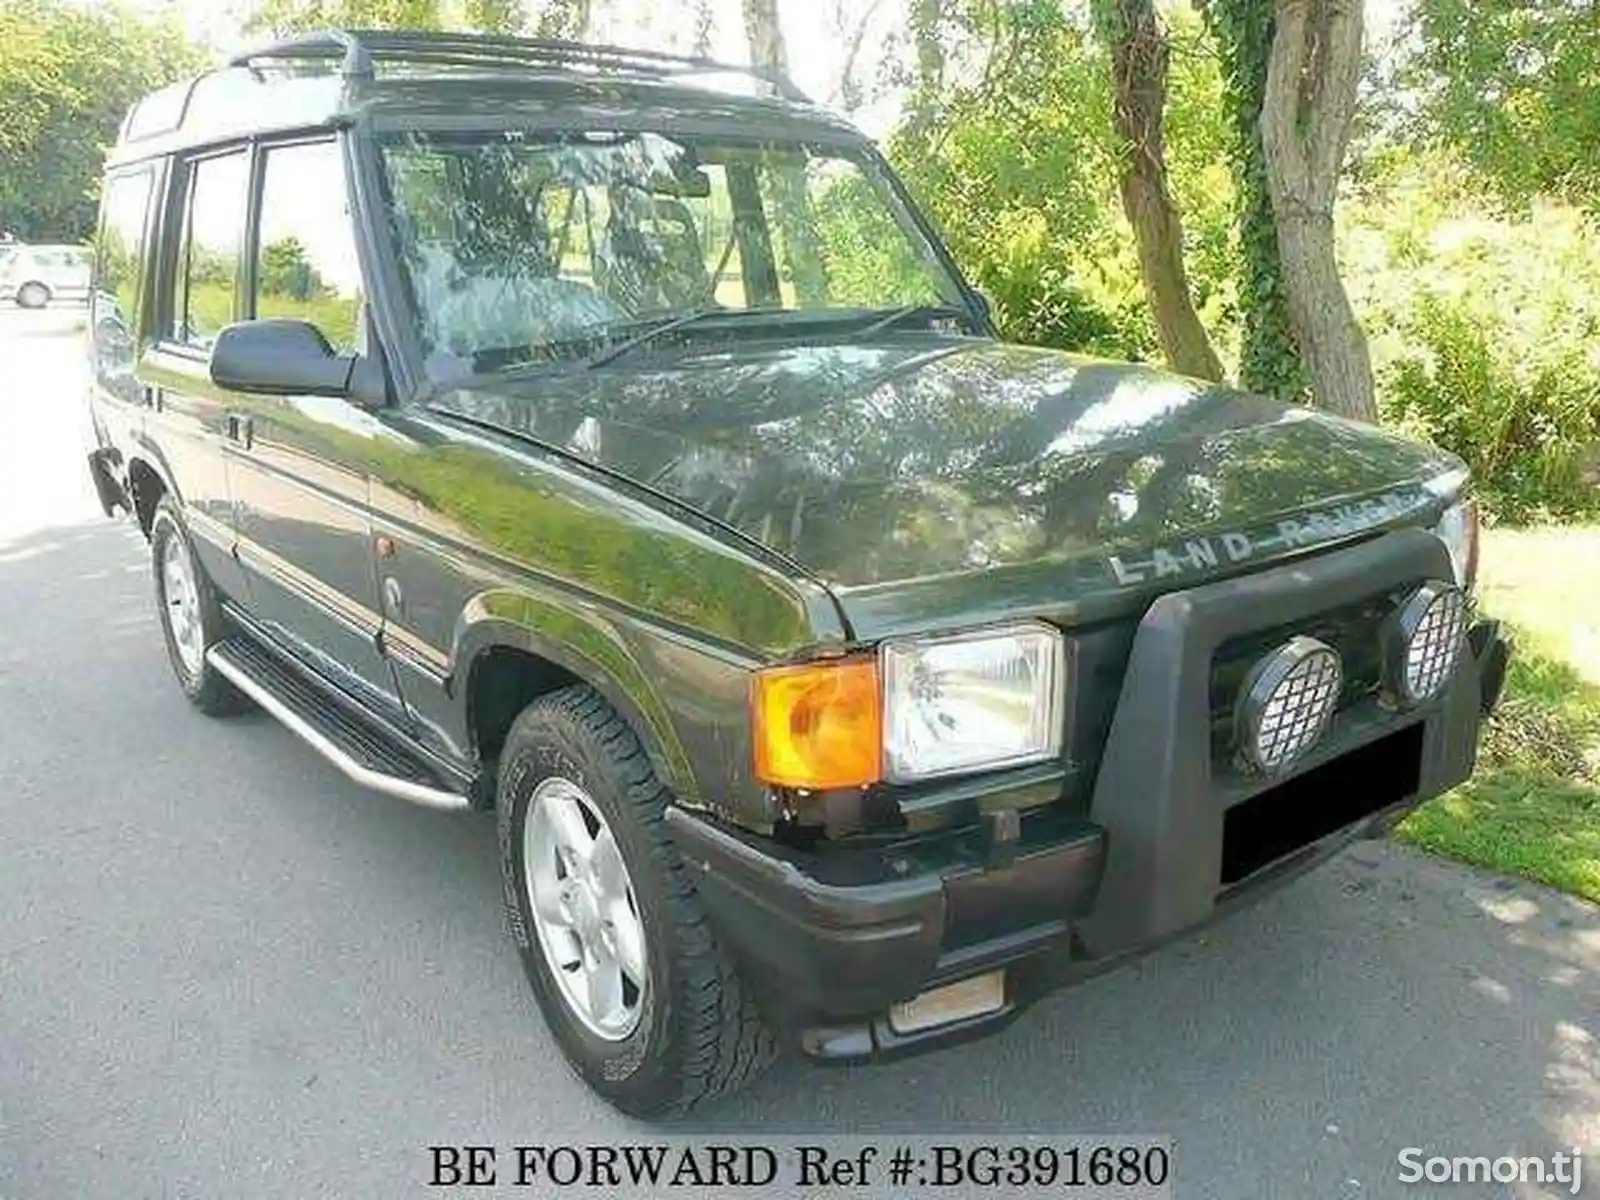 Бензонасос от Land Rover Discovery-6